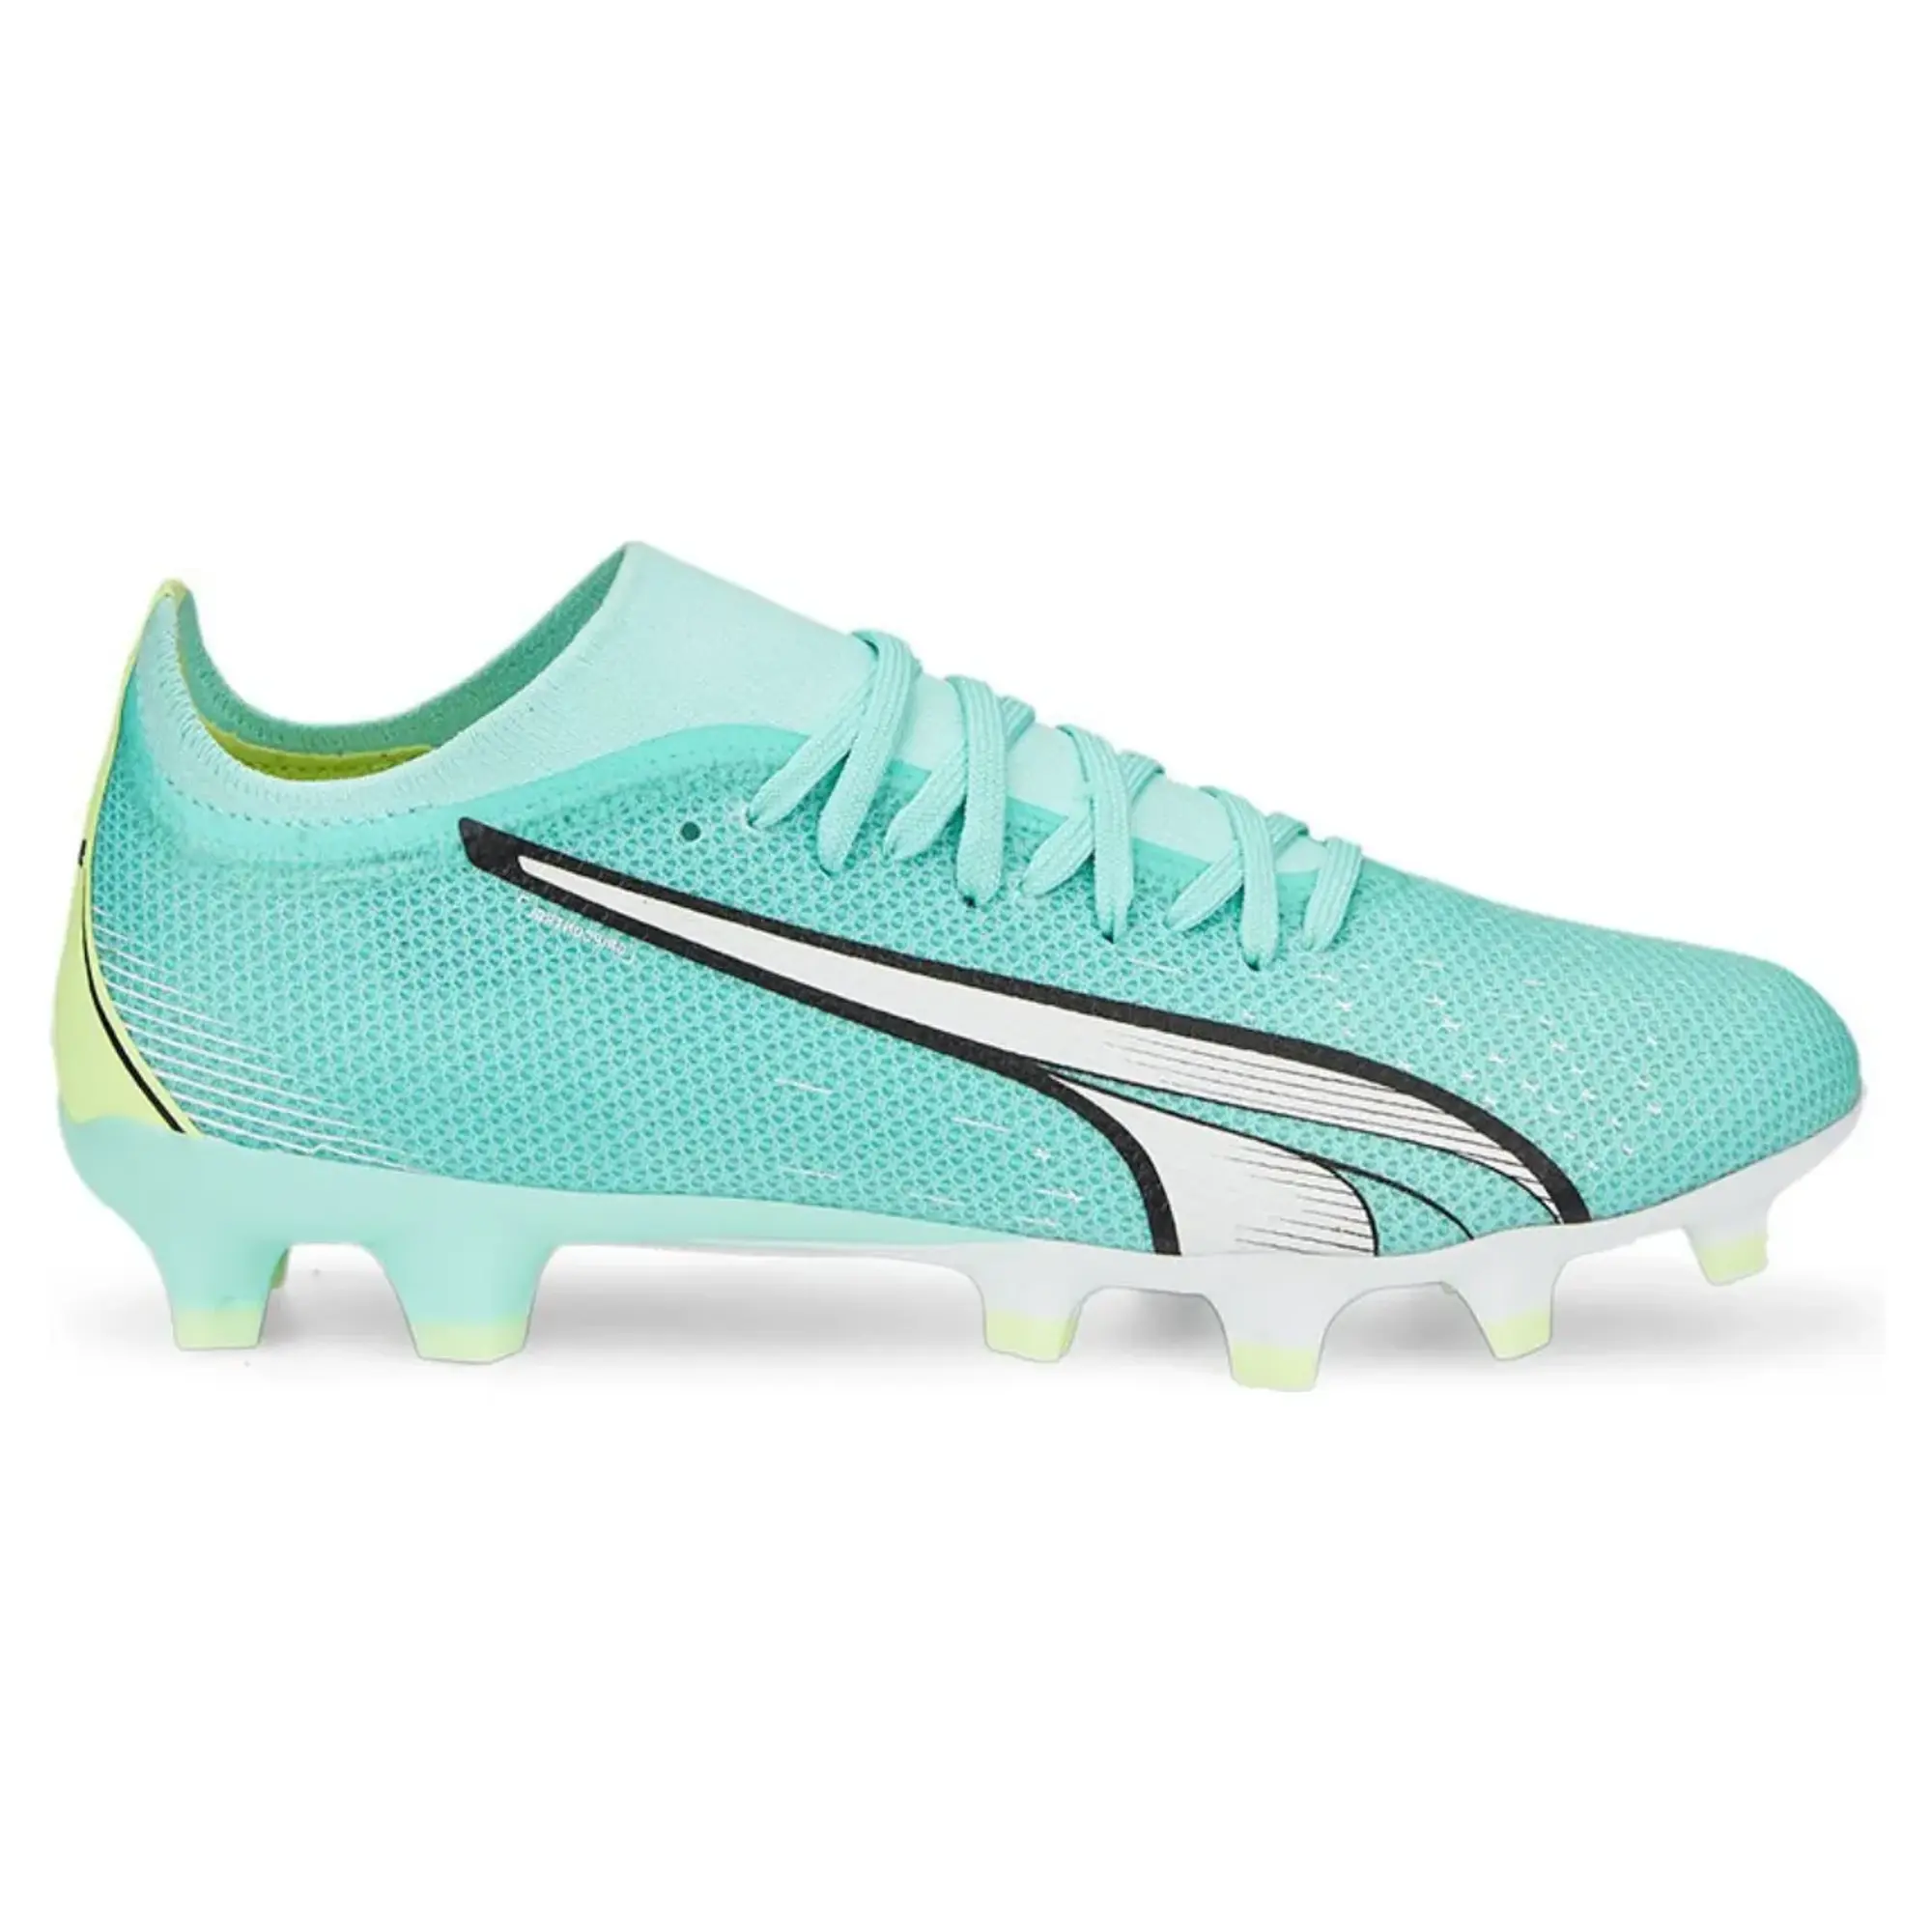 PUMA Ultra Match FG/AG Football Boots Women, Electric Peppermint/White/Fast Yellow